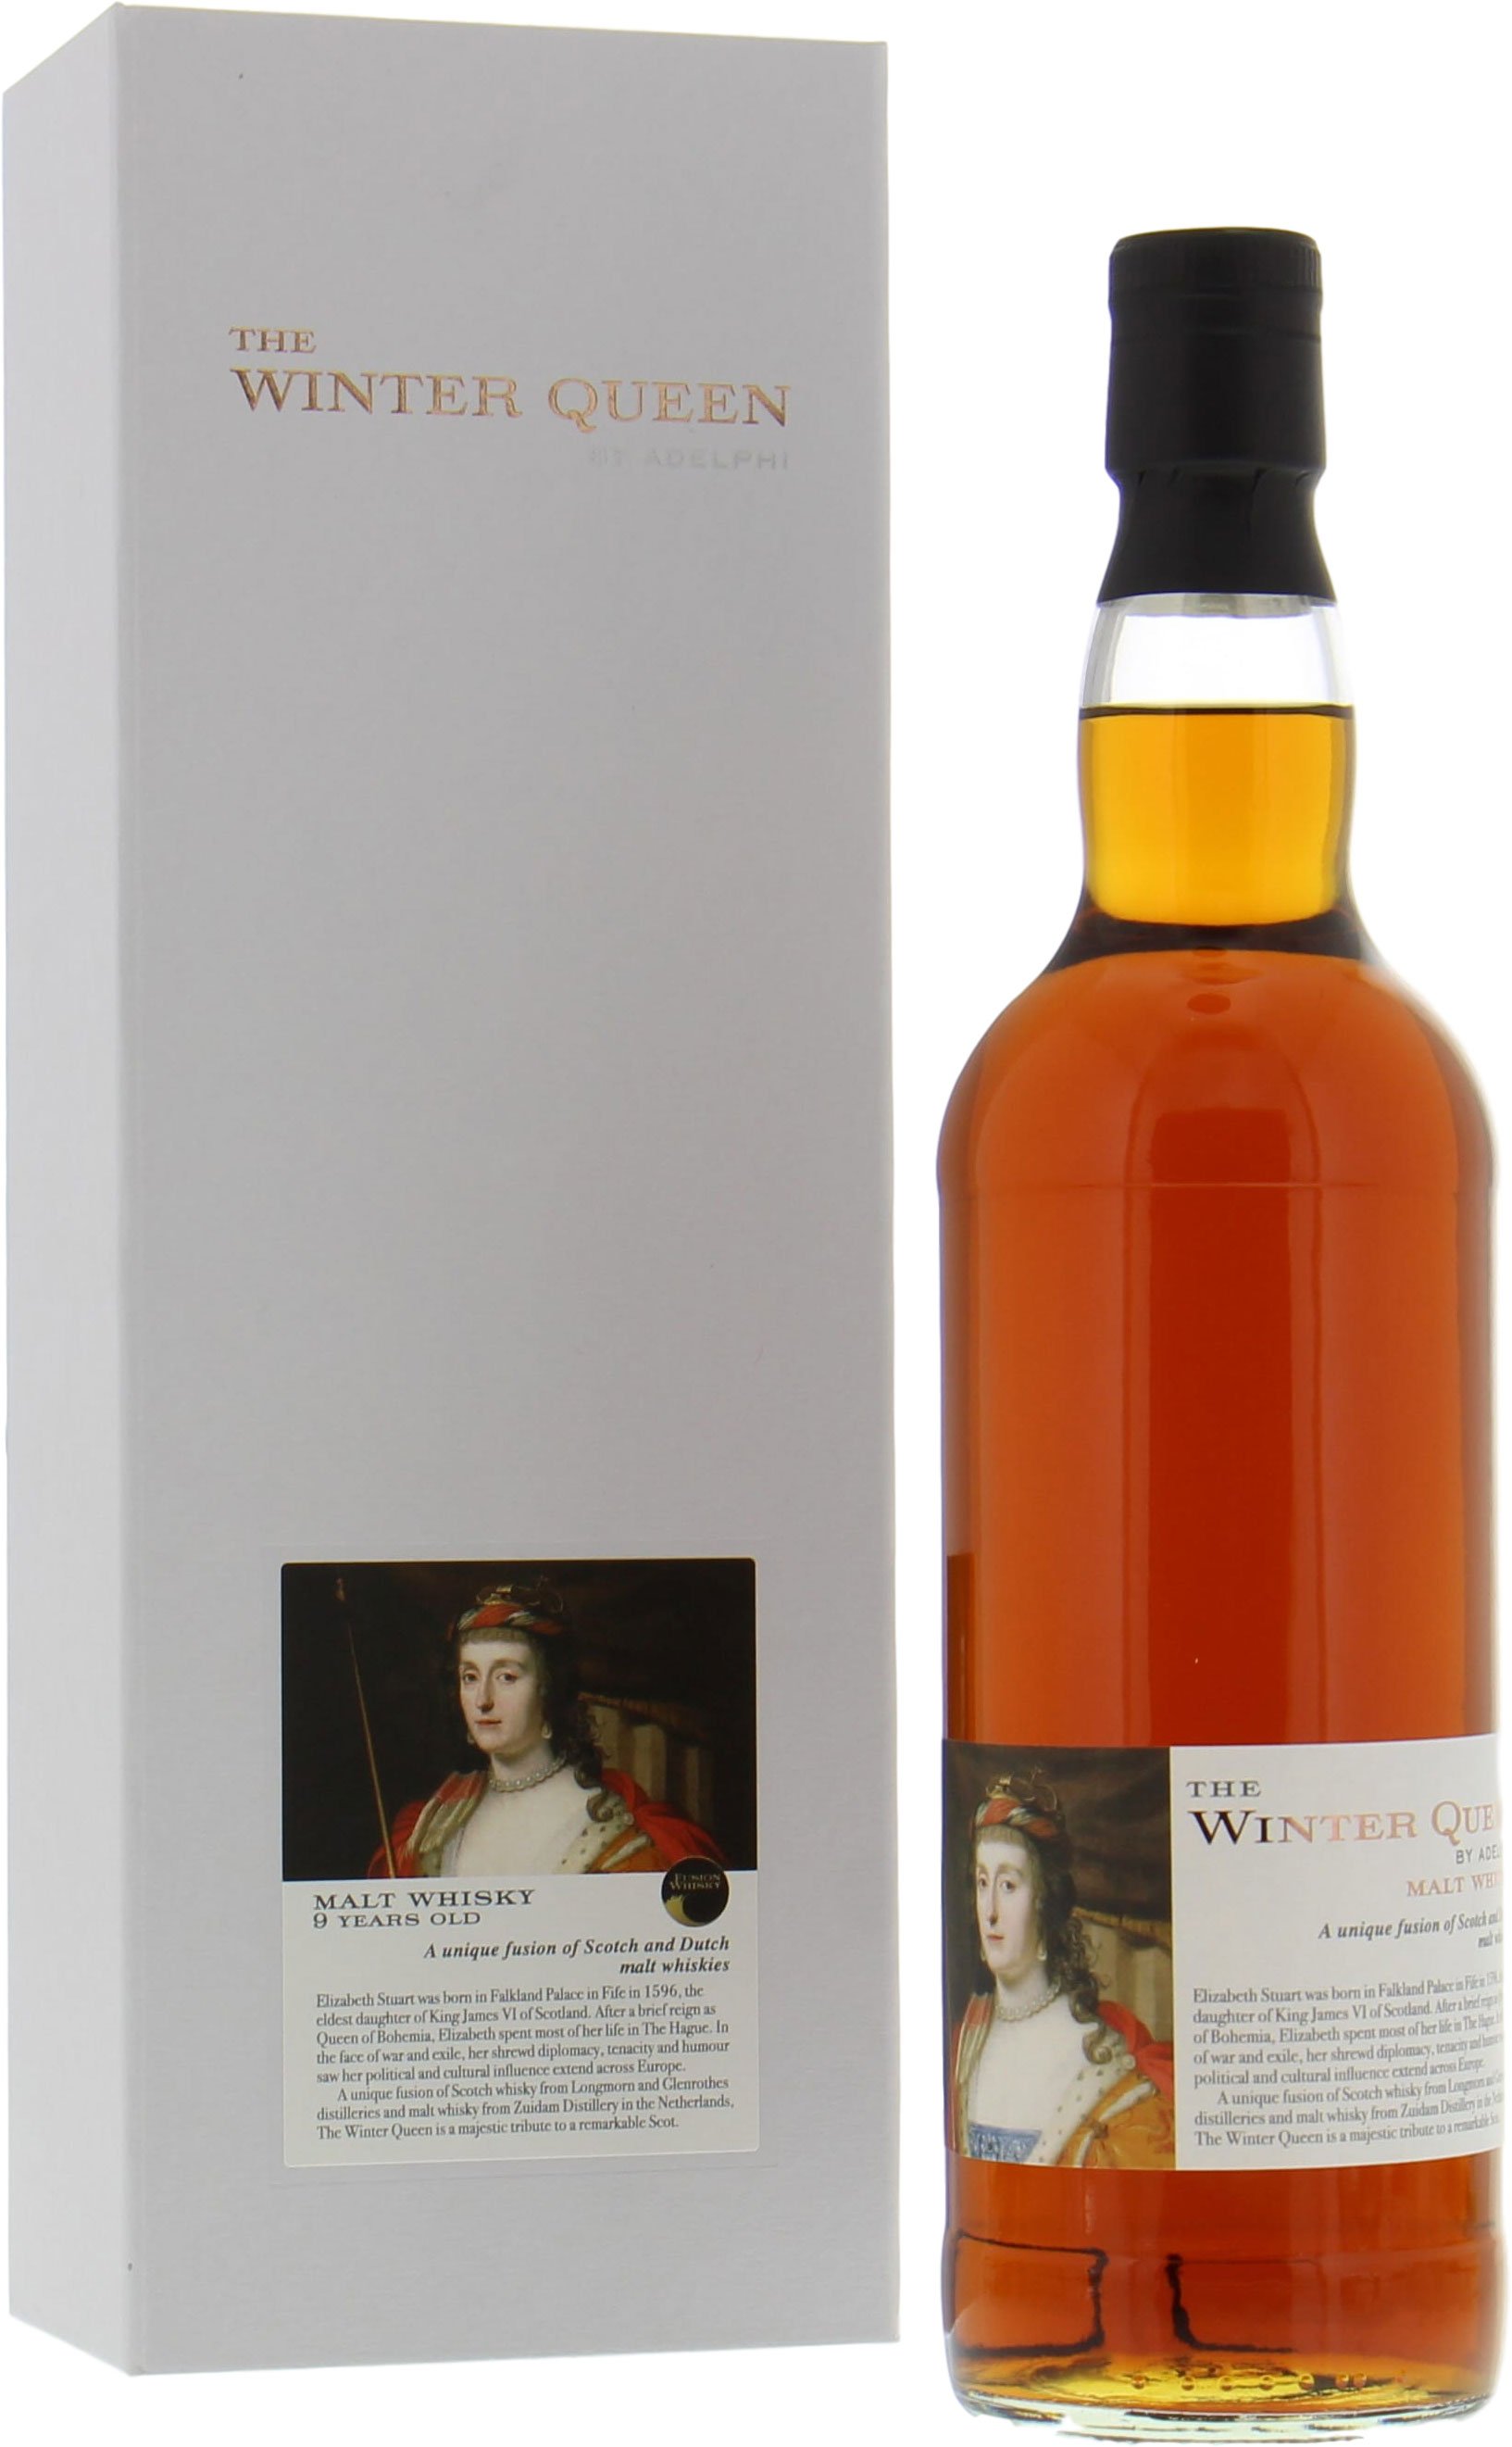 Adelphi - The Winter Queen 9 Years Old 52.7% NV